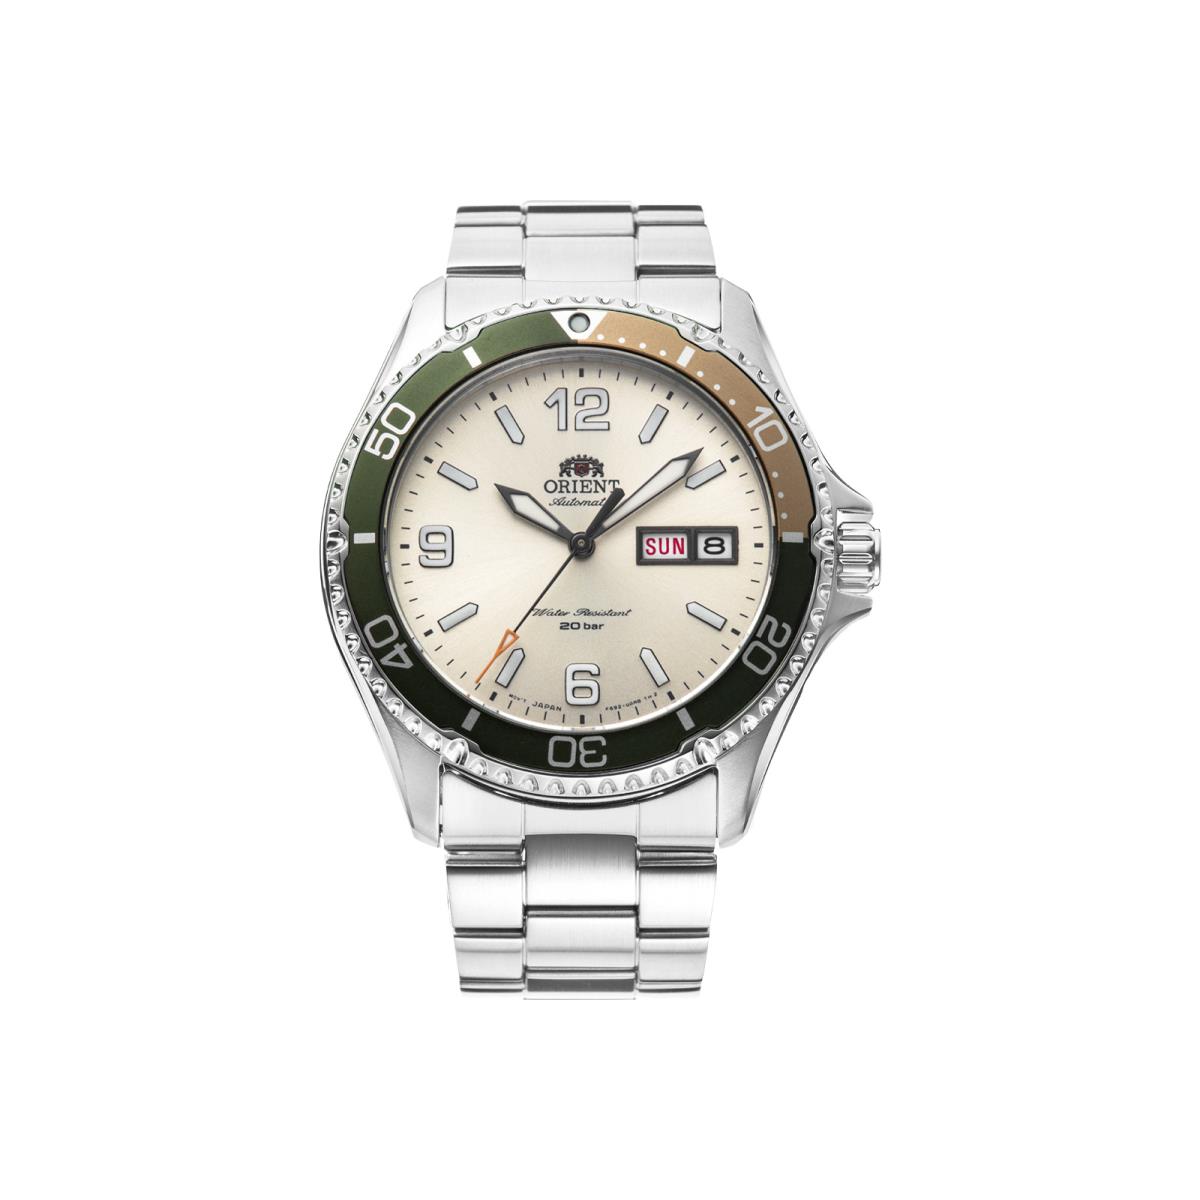 Orient Mako-3 Japanese Automatic 200m Diver Watch with Sapphire Crystal Ivory - RA-AA0821S19B